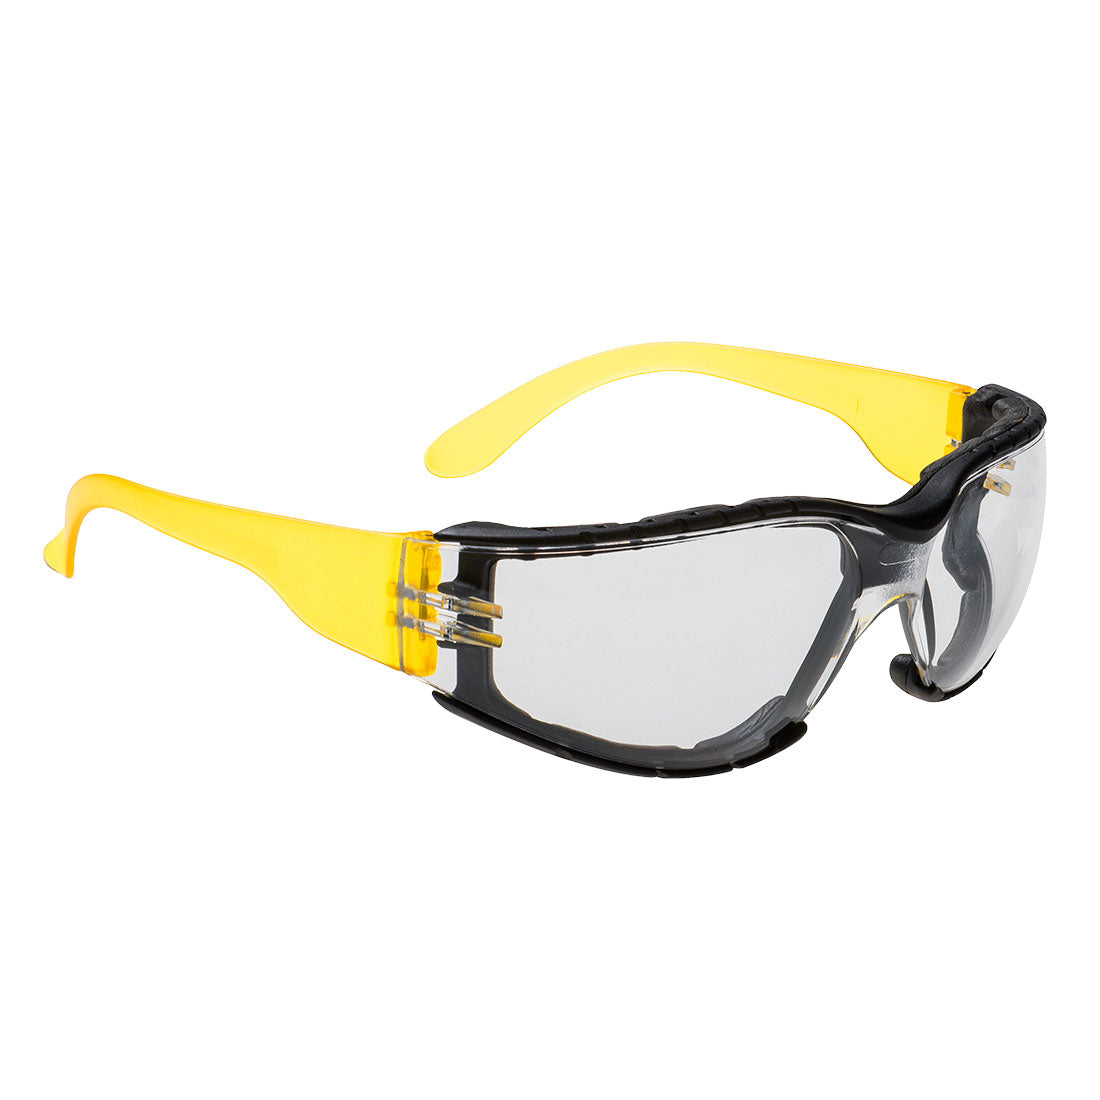 Clear Lens Portwest PW11 Levo 2 in 1 Safety Spectacles Glasses Goggles